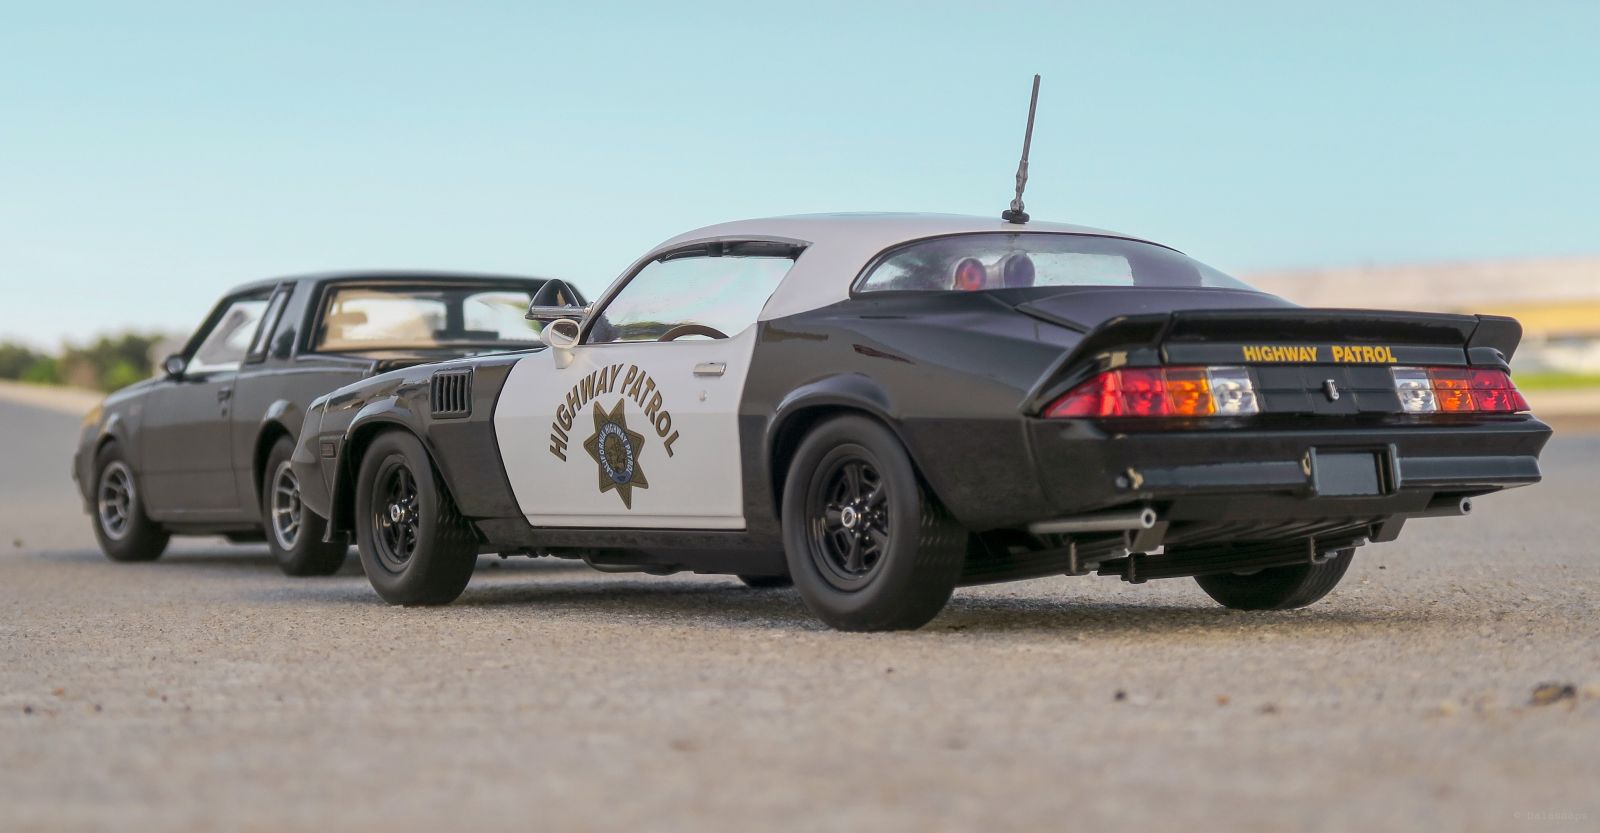 Illustration for article titled California Highway Patrol 79’ Z/28 in 1/18 Scale by GreenLight. Short Review.